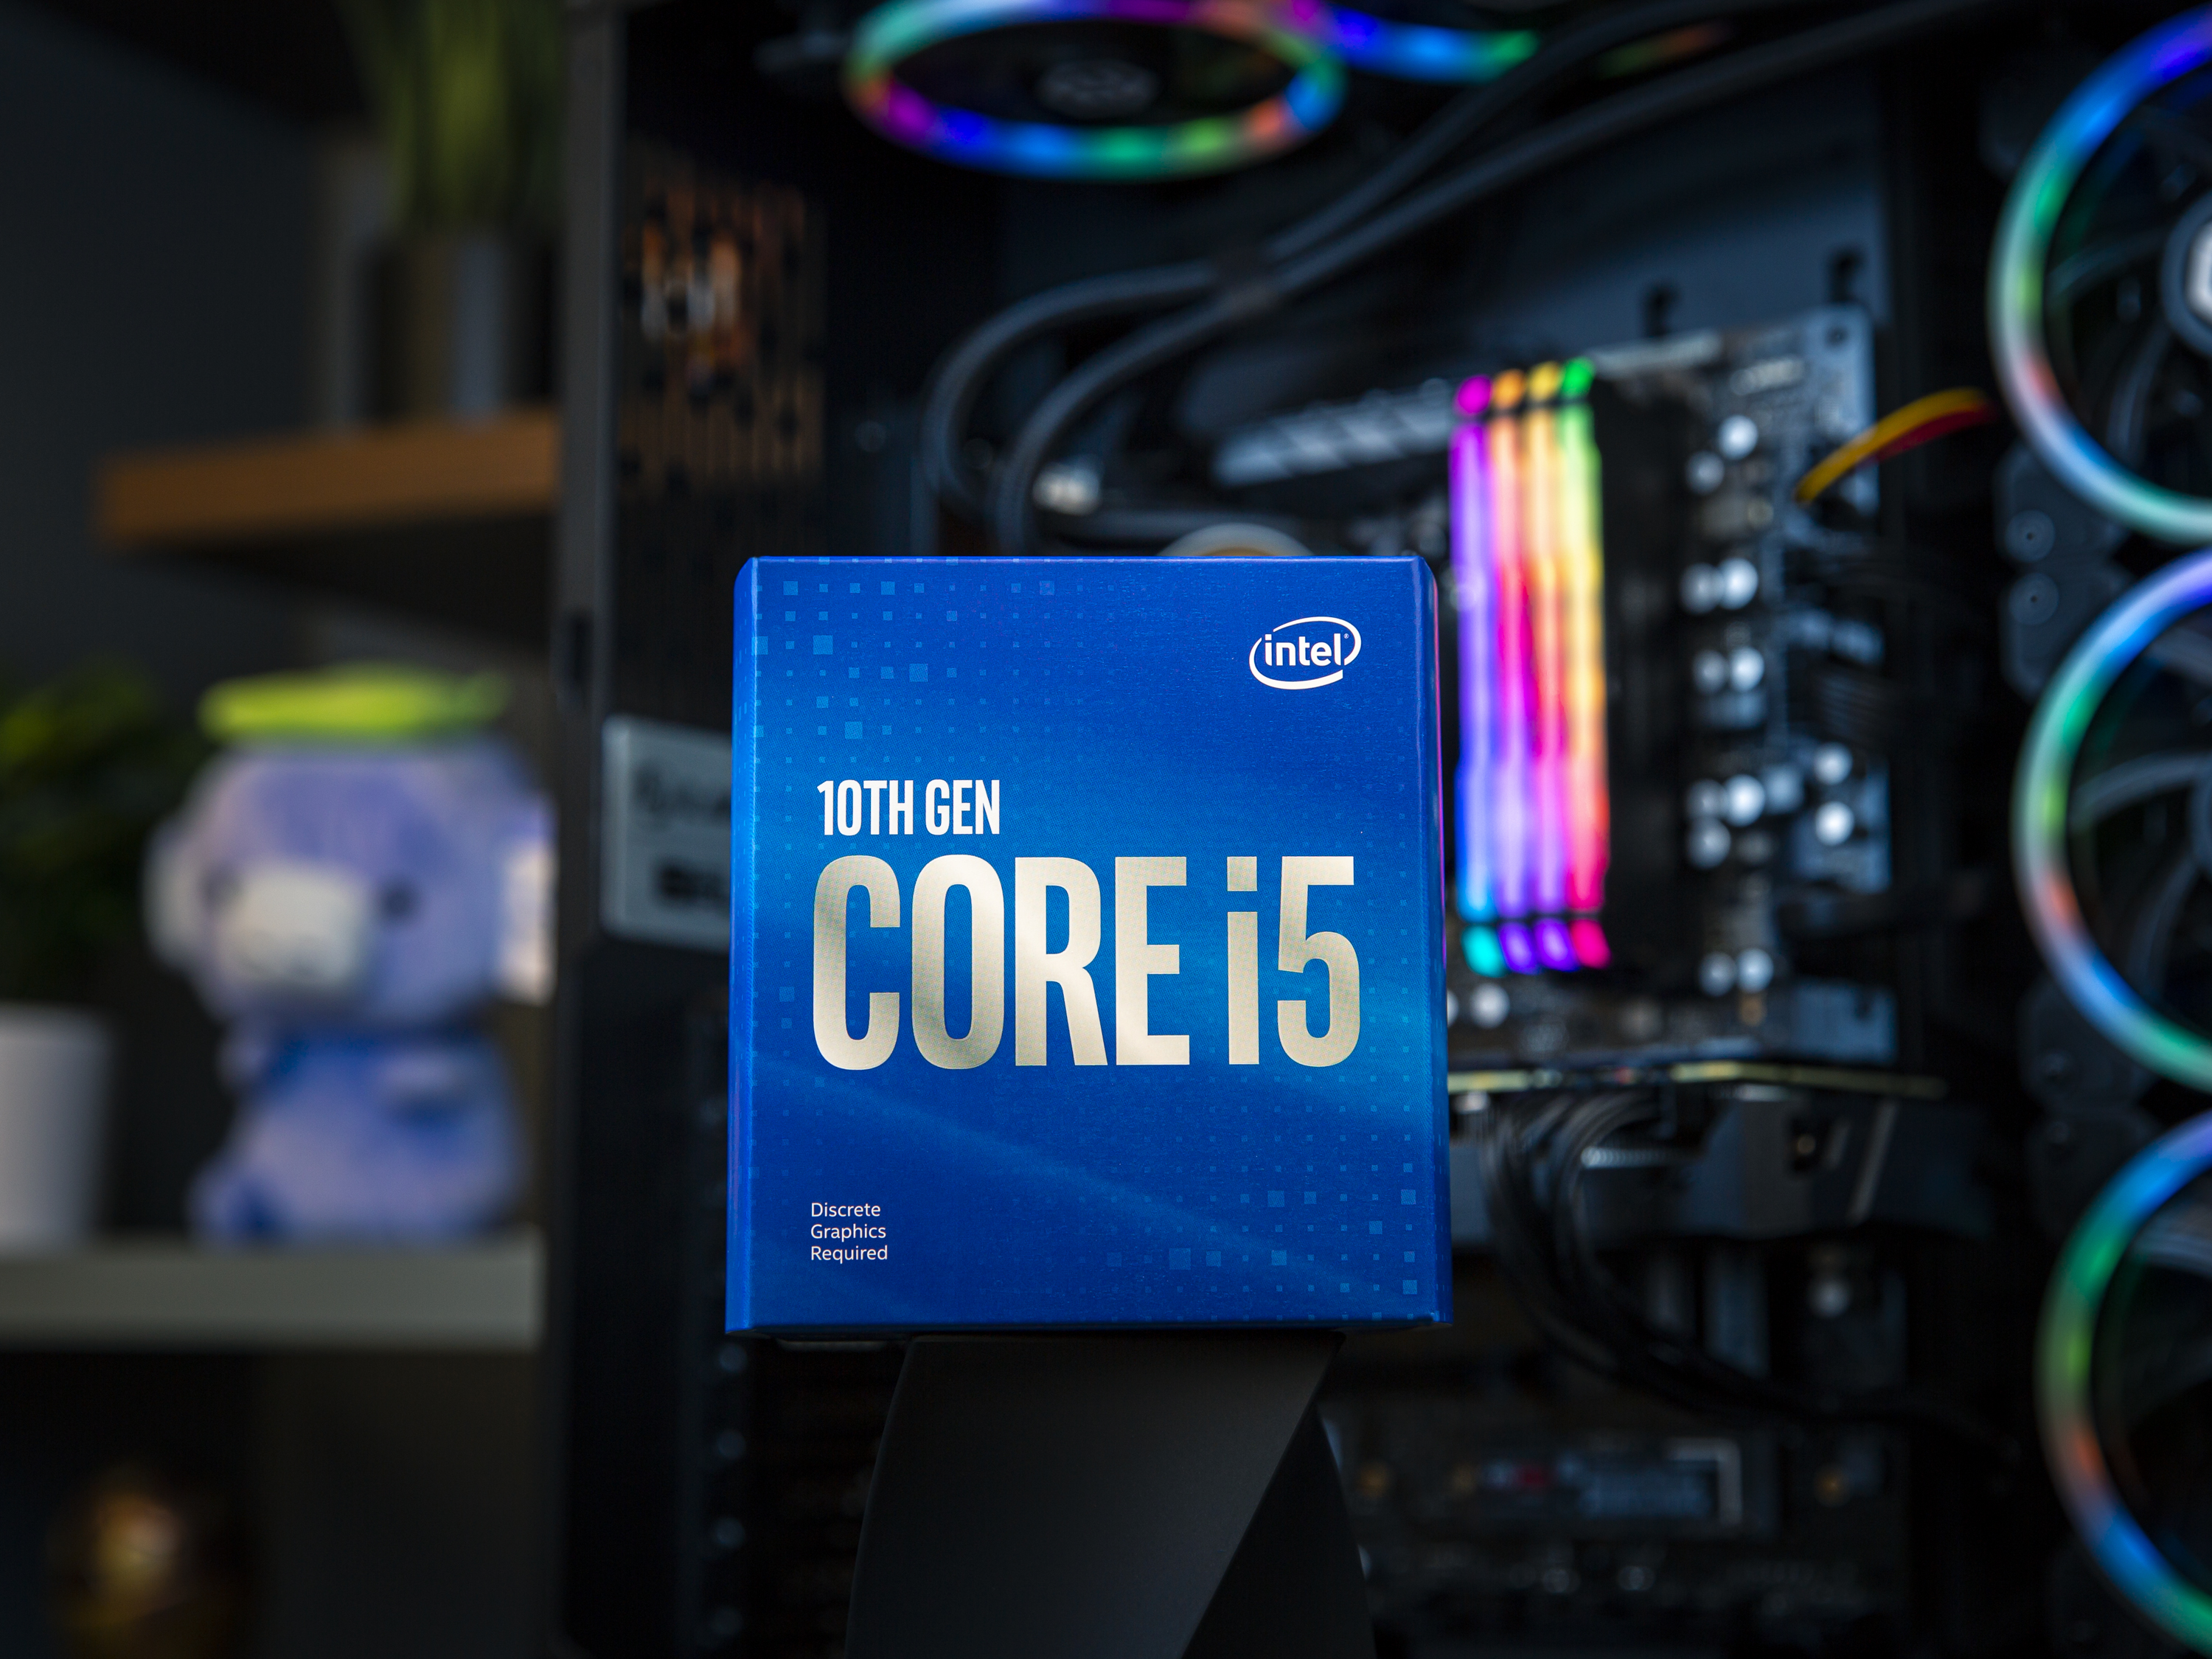 Intel Core i5-10400 Gets Benchmarked and tested, much faster SMT